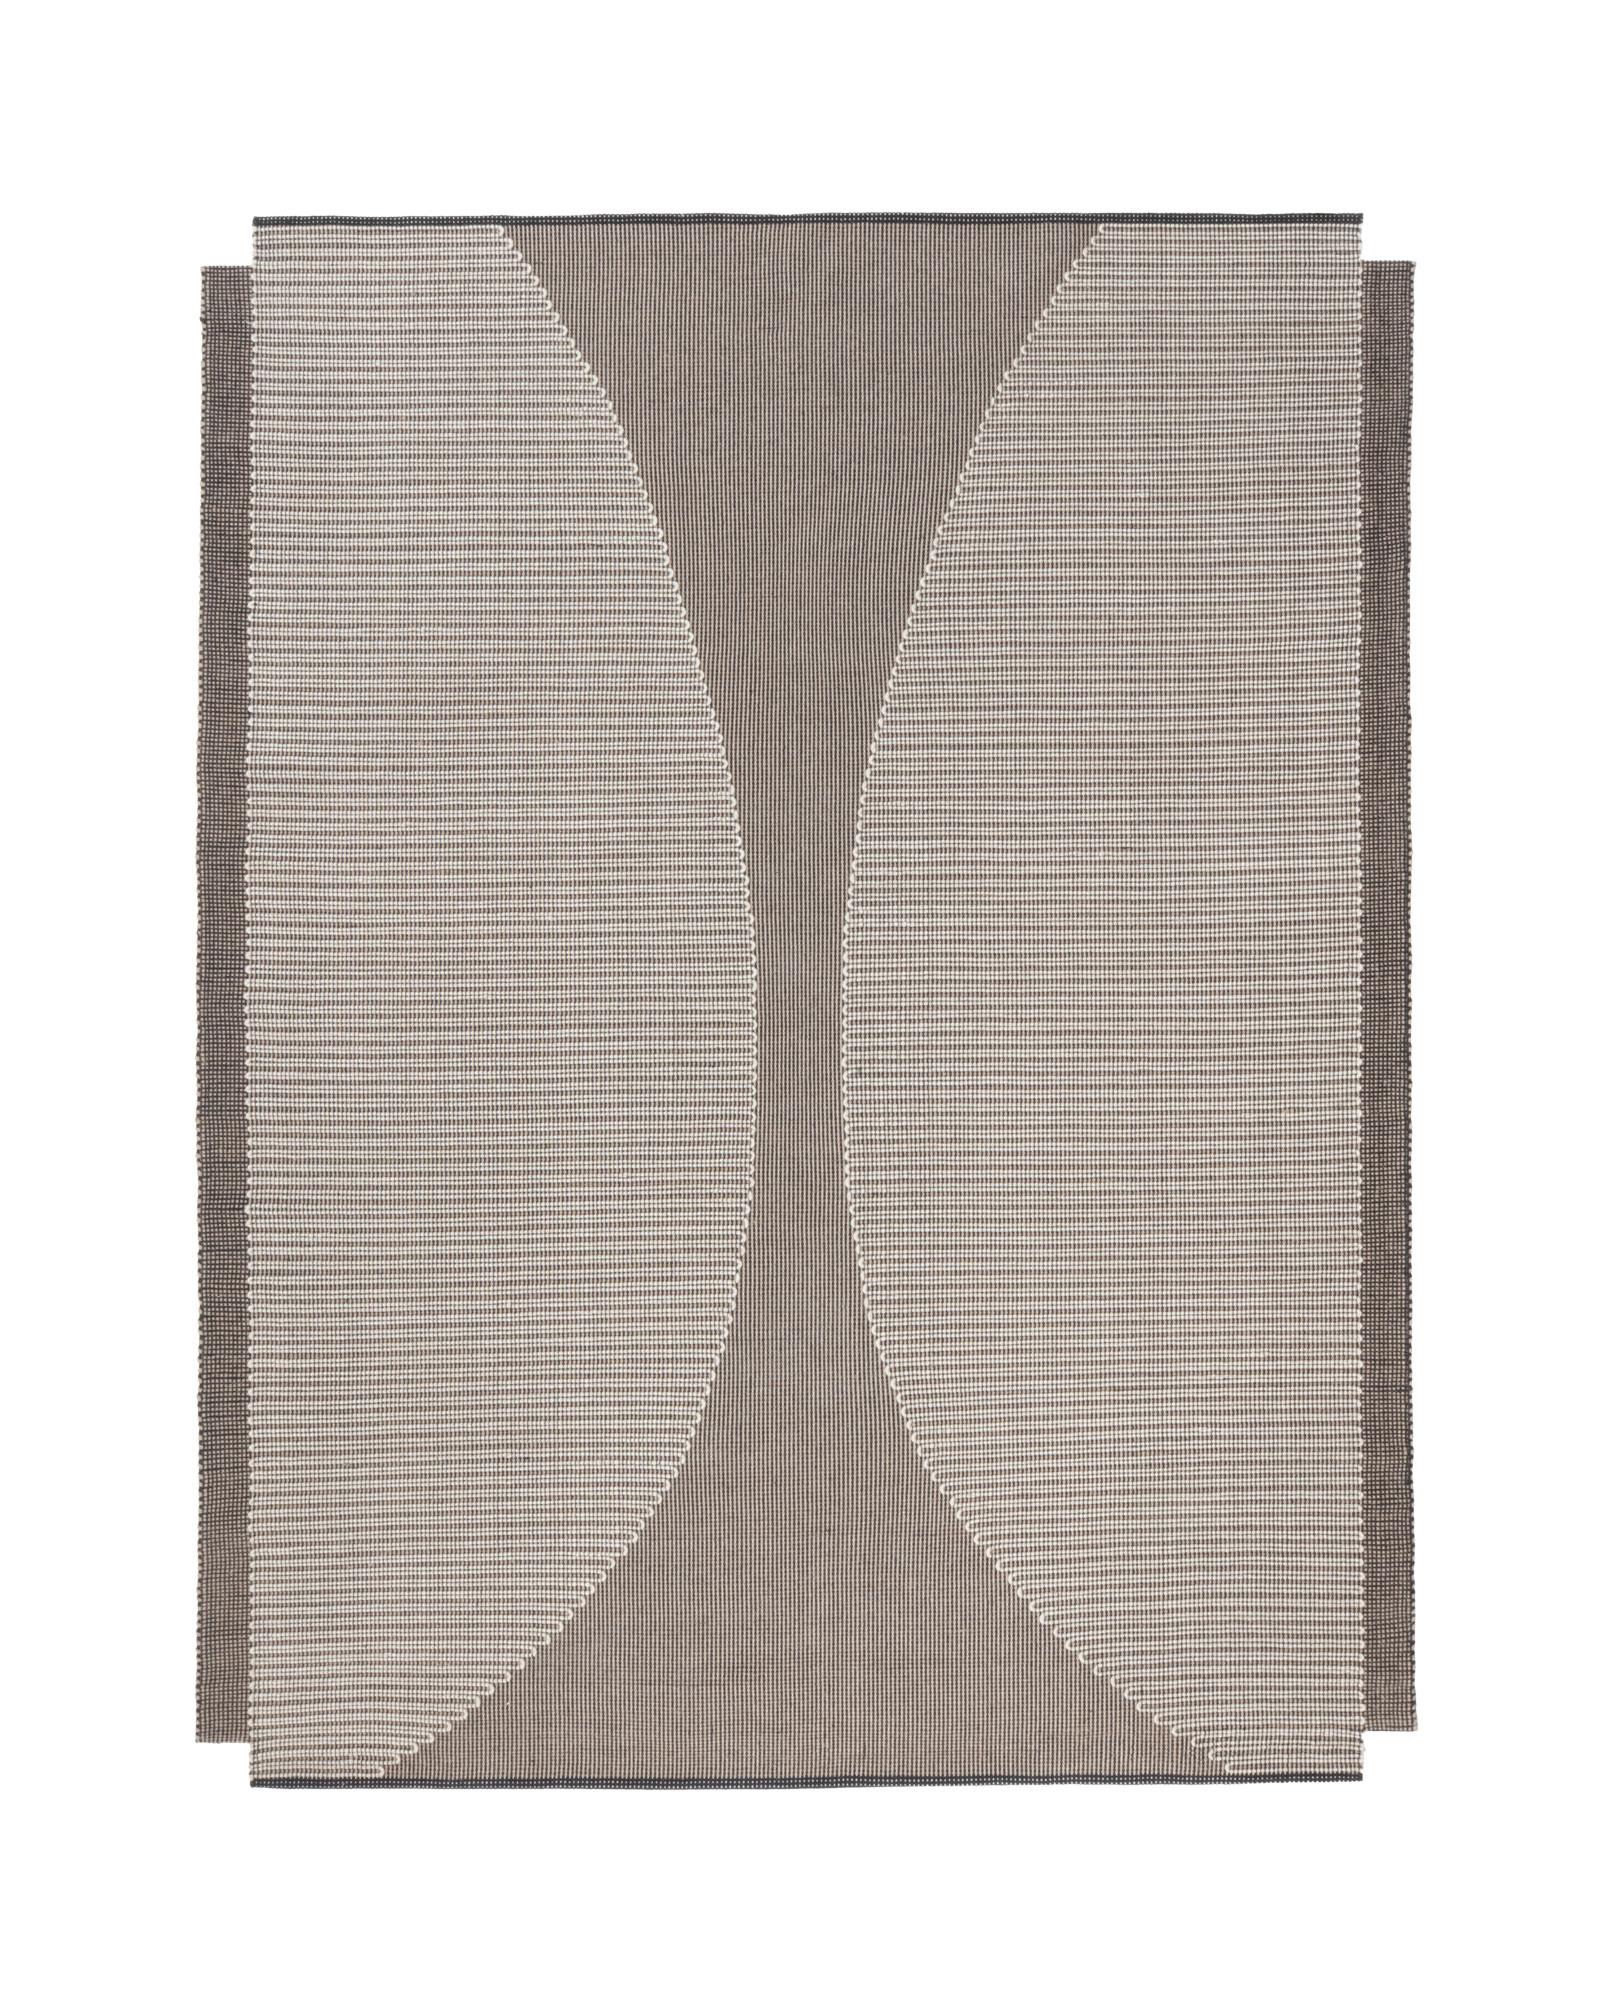 cc-tapis VICE VERSA 3 Light version handmade rug by Chiara Andreatti In New Condition For Sale In Brooklyn, NY